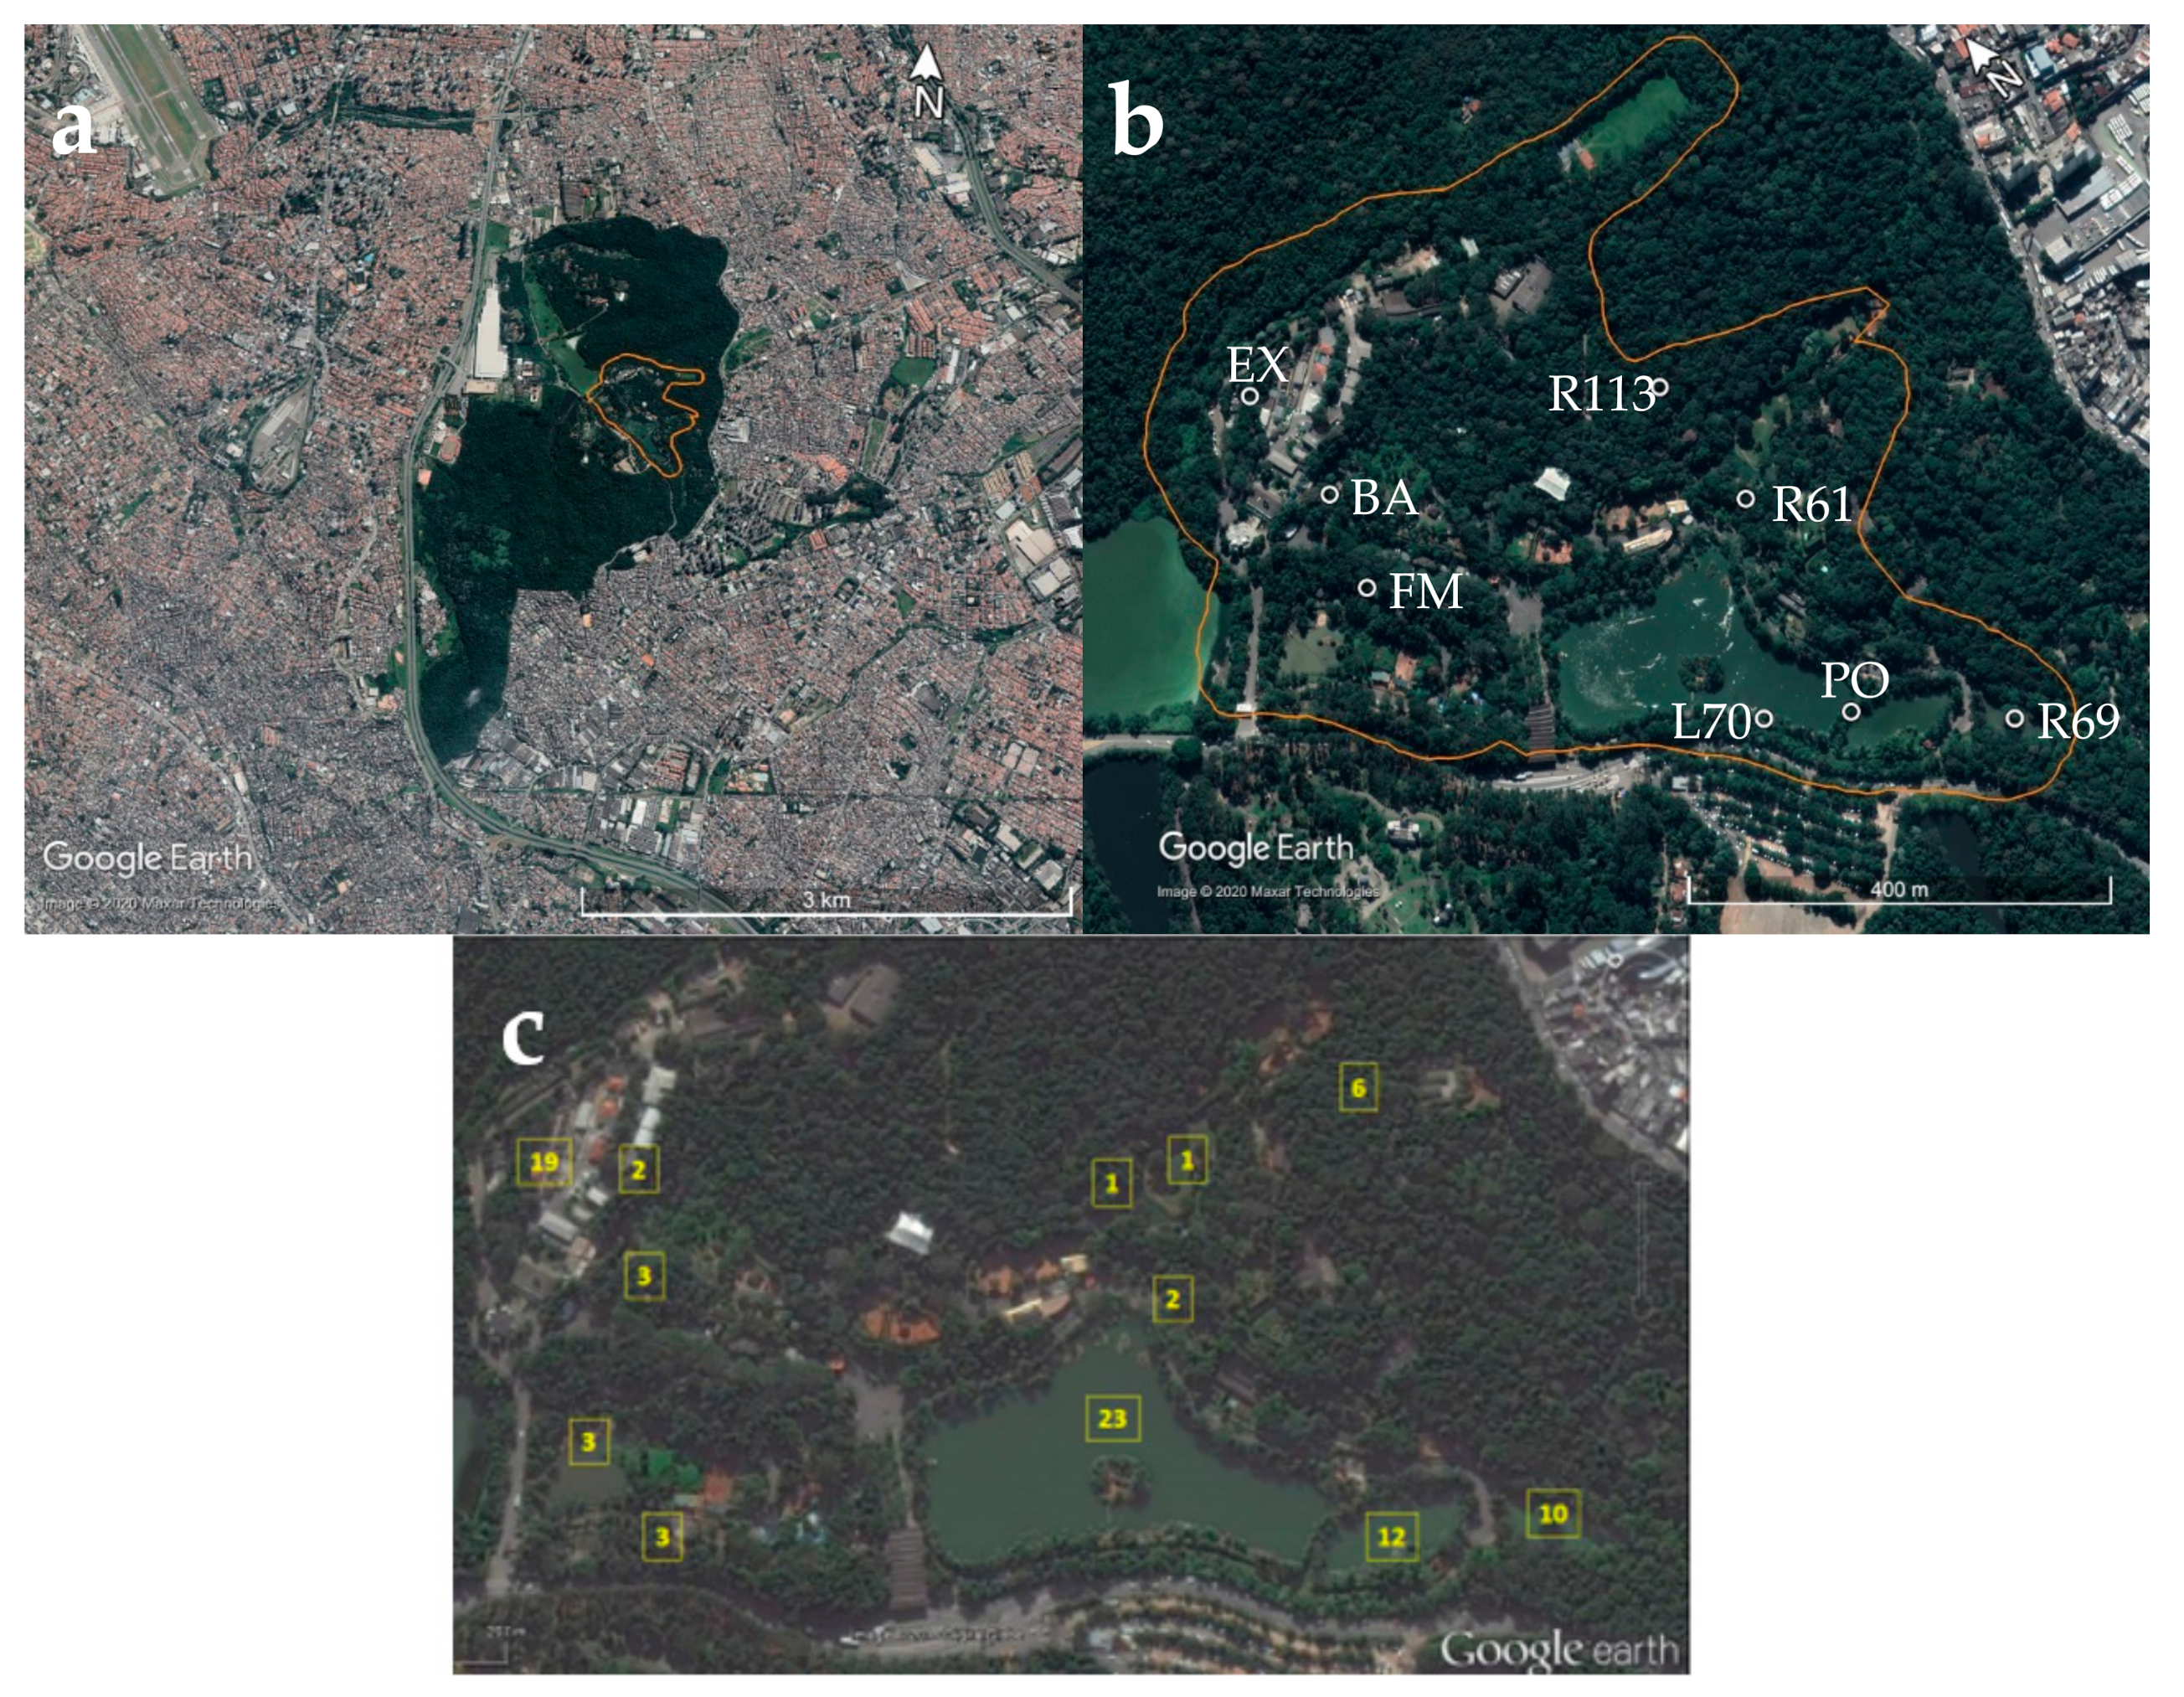 Insects | Free Full-Text | Assessing Diversity, Plasmodium Infection and  Blood Meal Sources in Mosquitoes (Diptera: Culicidae) from a Brazilian  Zoological Park with Avian Malaria Transmission | HTML